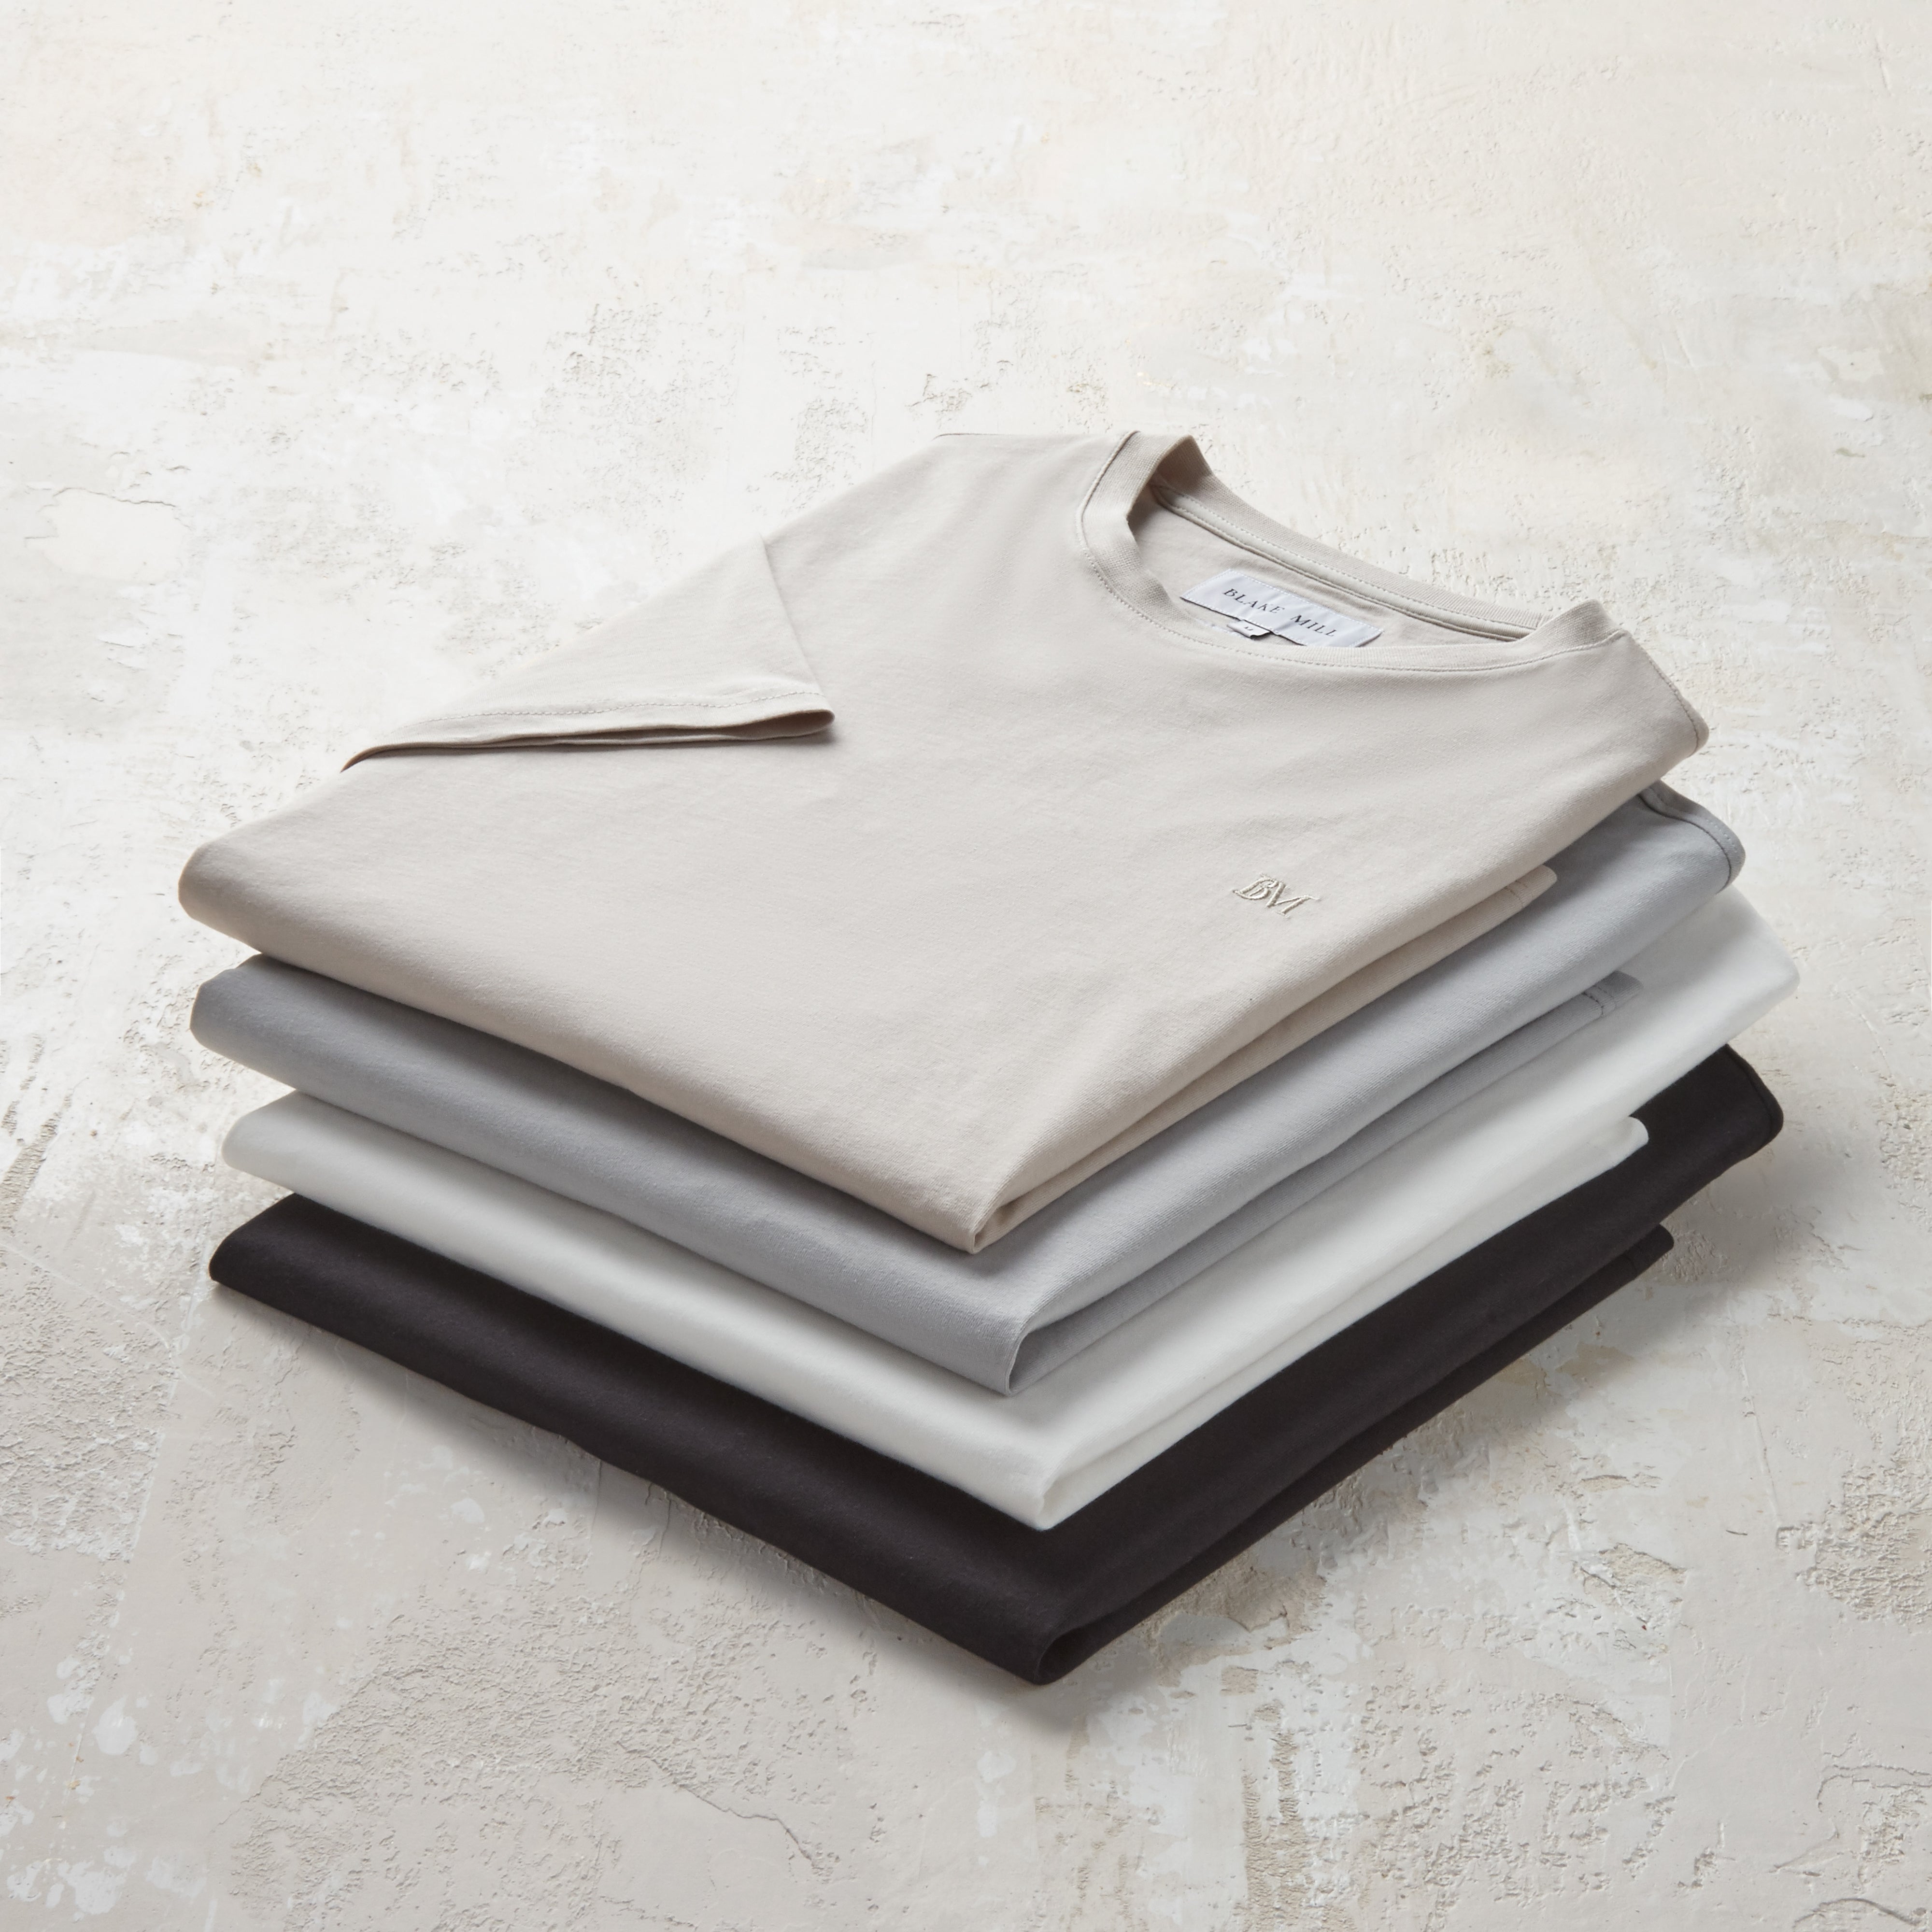 Studio image showing all four of the Blake Mill organic cotton t-shirts in a stacked pile.